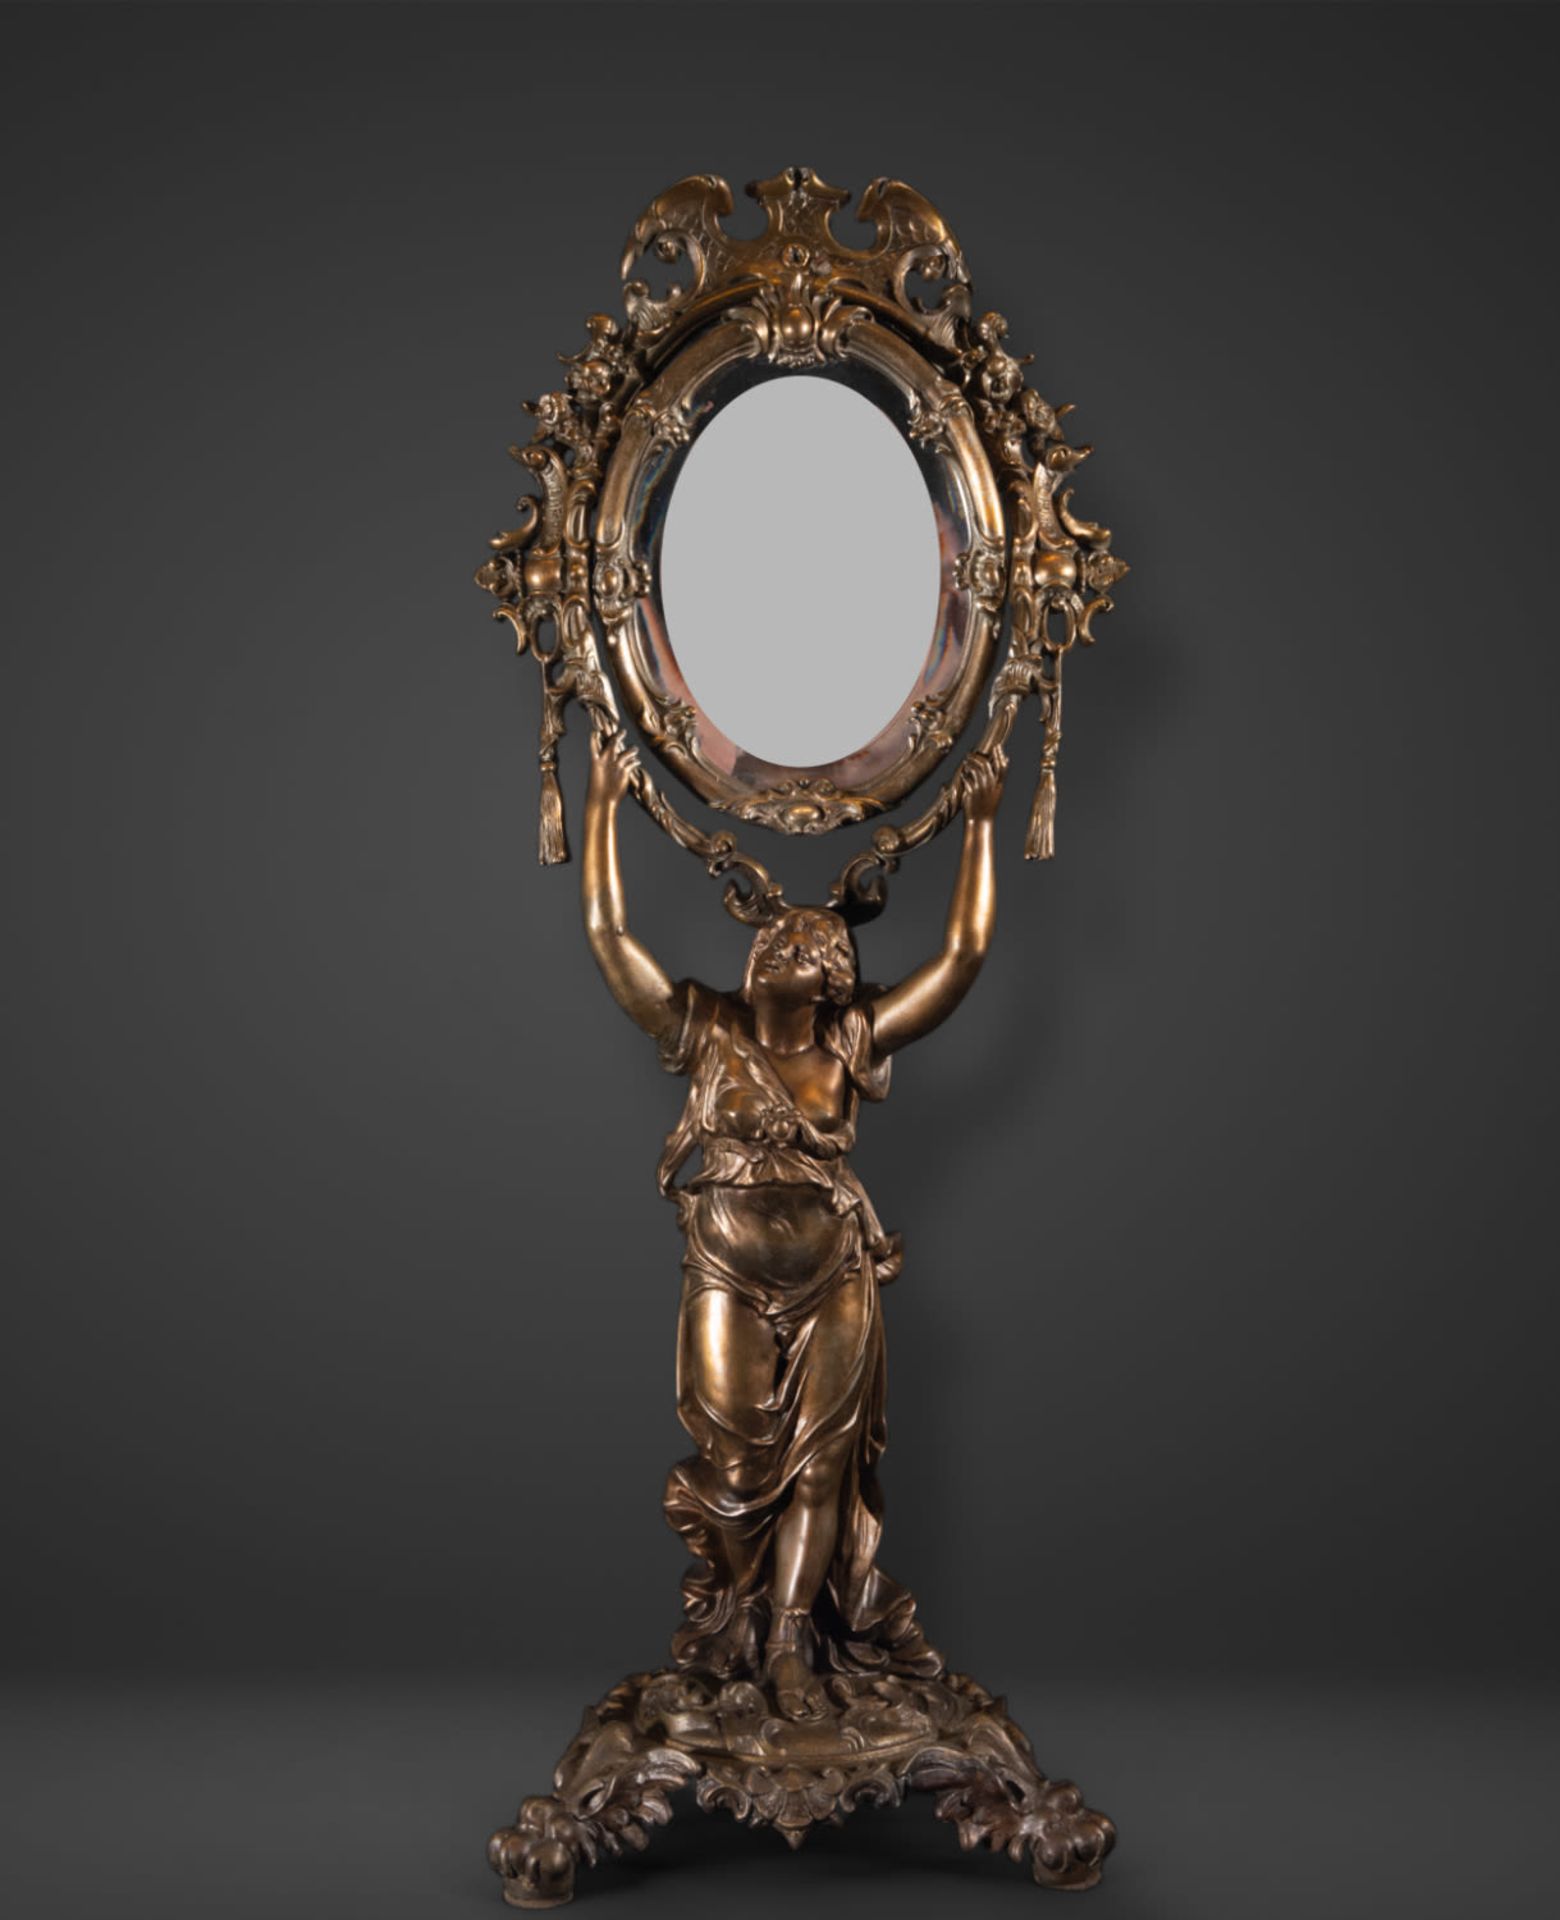 North American Beaux Arts Style Mirror, 19th Century